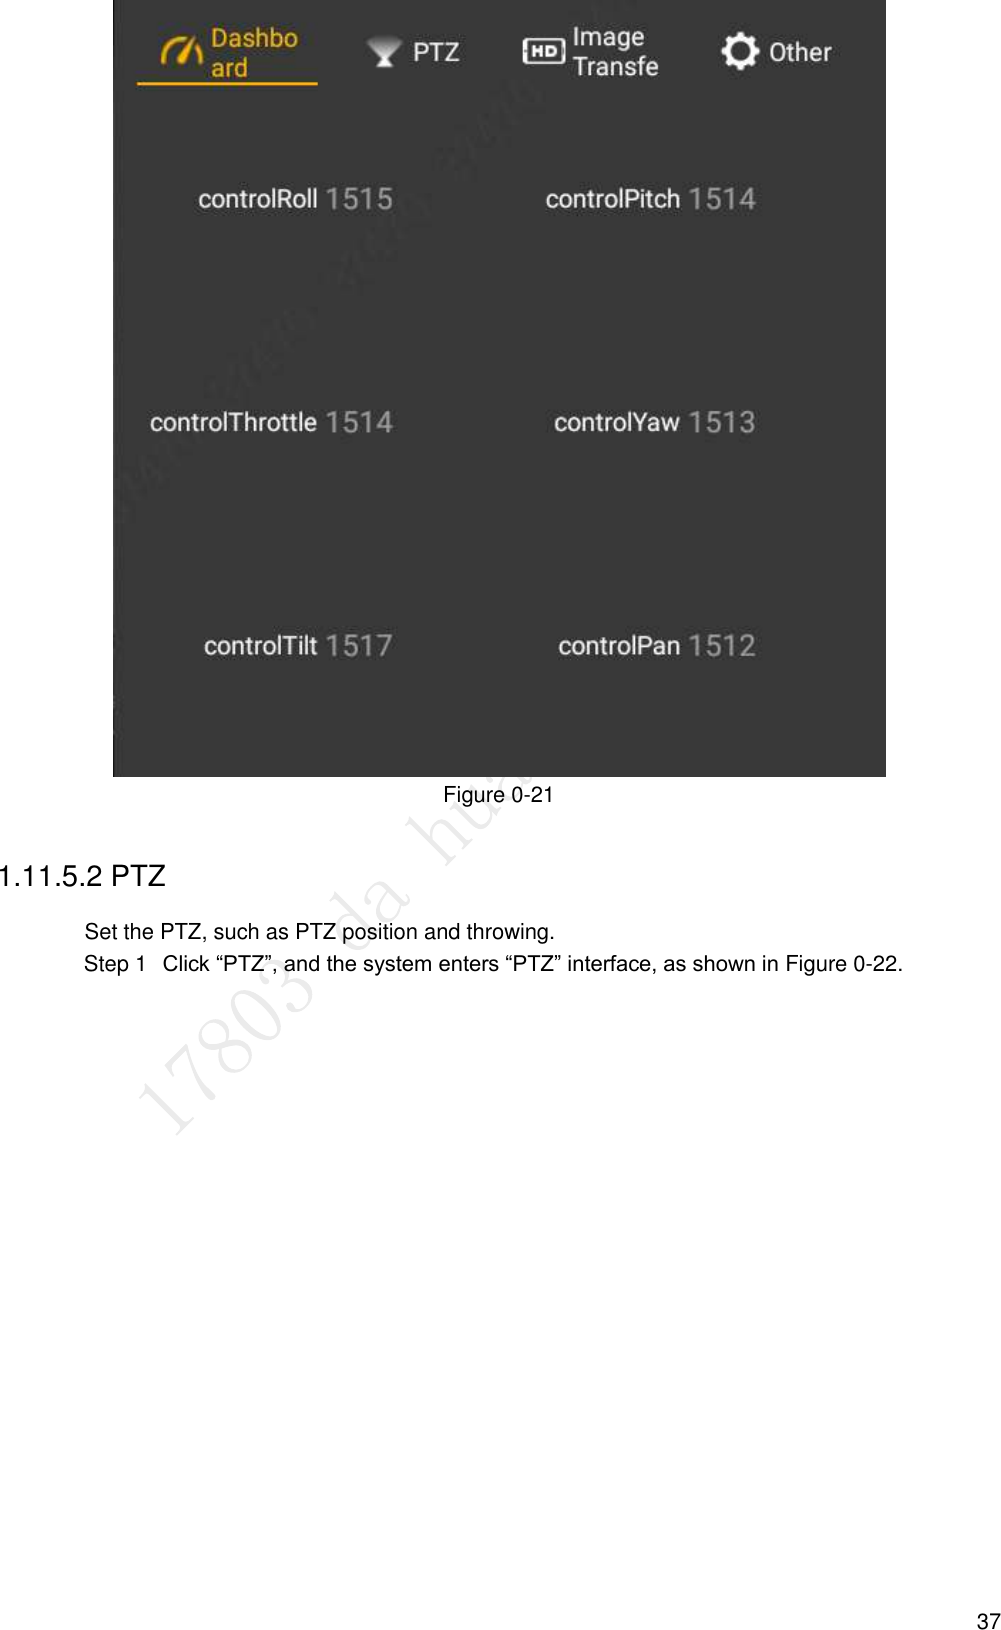  37  Figure 0-21 1.11.5.2 PTZ Set the PTZ, such as PTZ position and throwing.  Click “PTZ”, and the system enters “PTZ” interface, as shown in Figure 0-22. Step 1